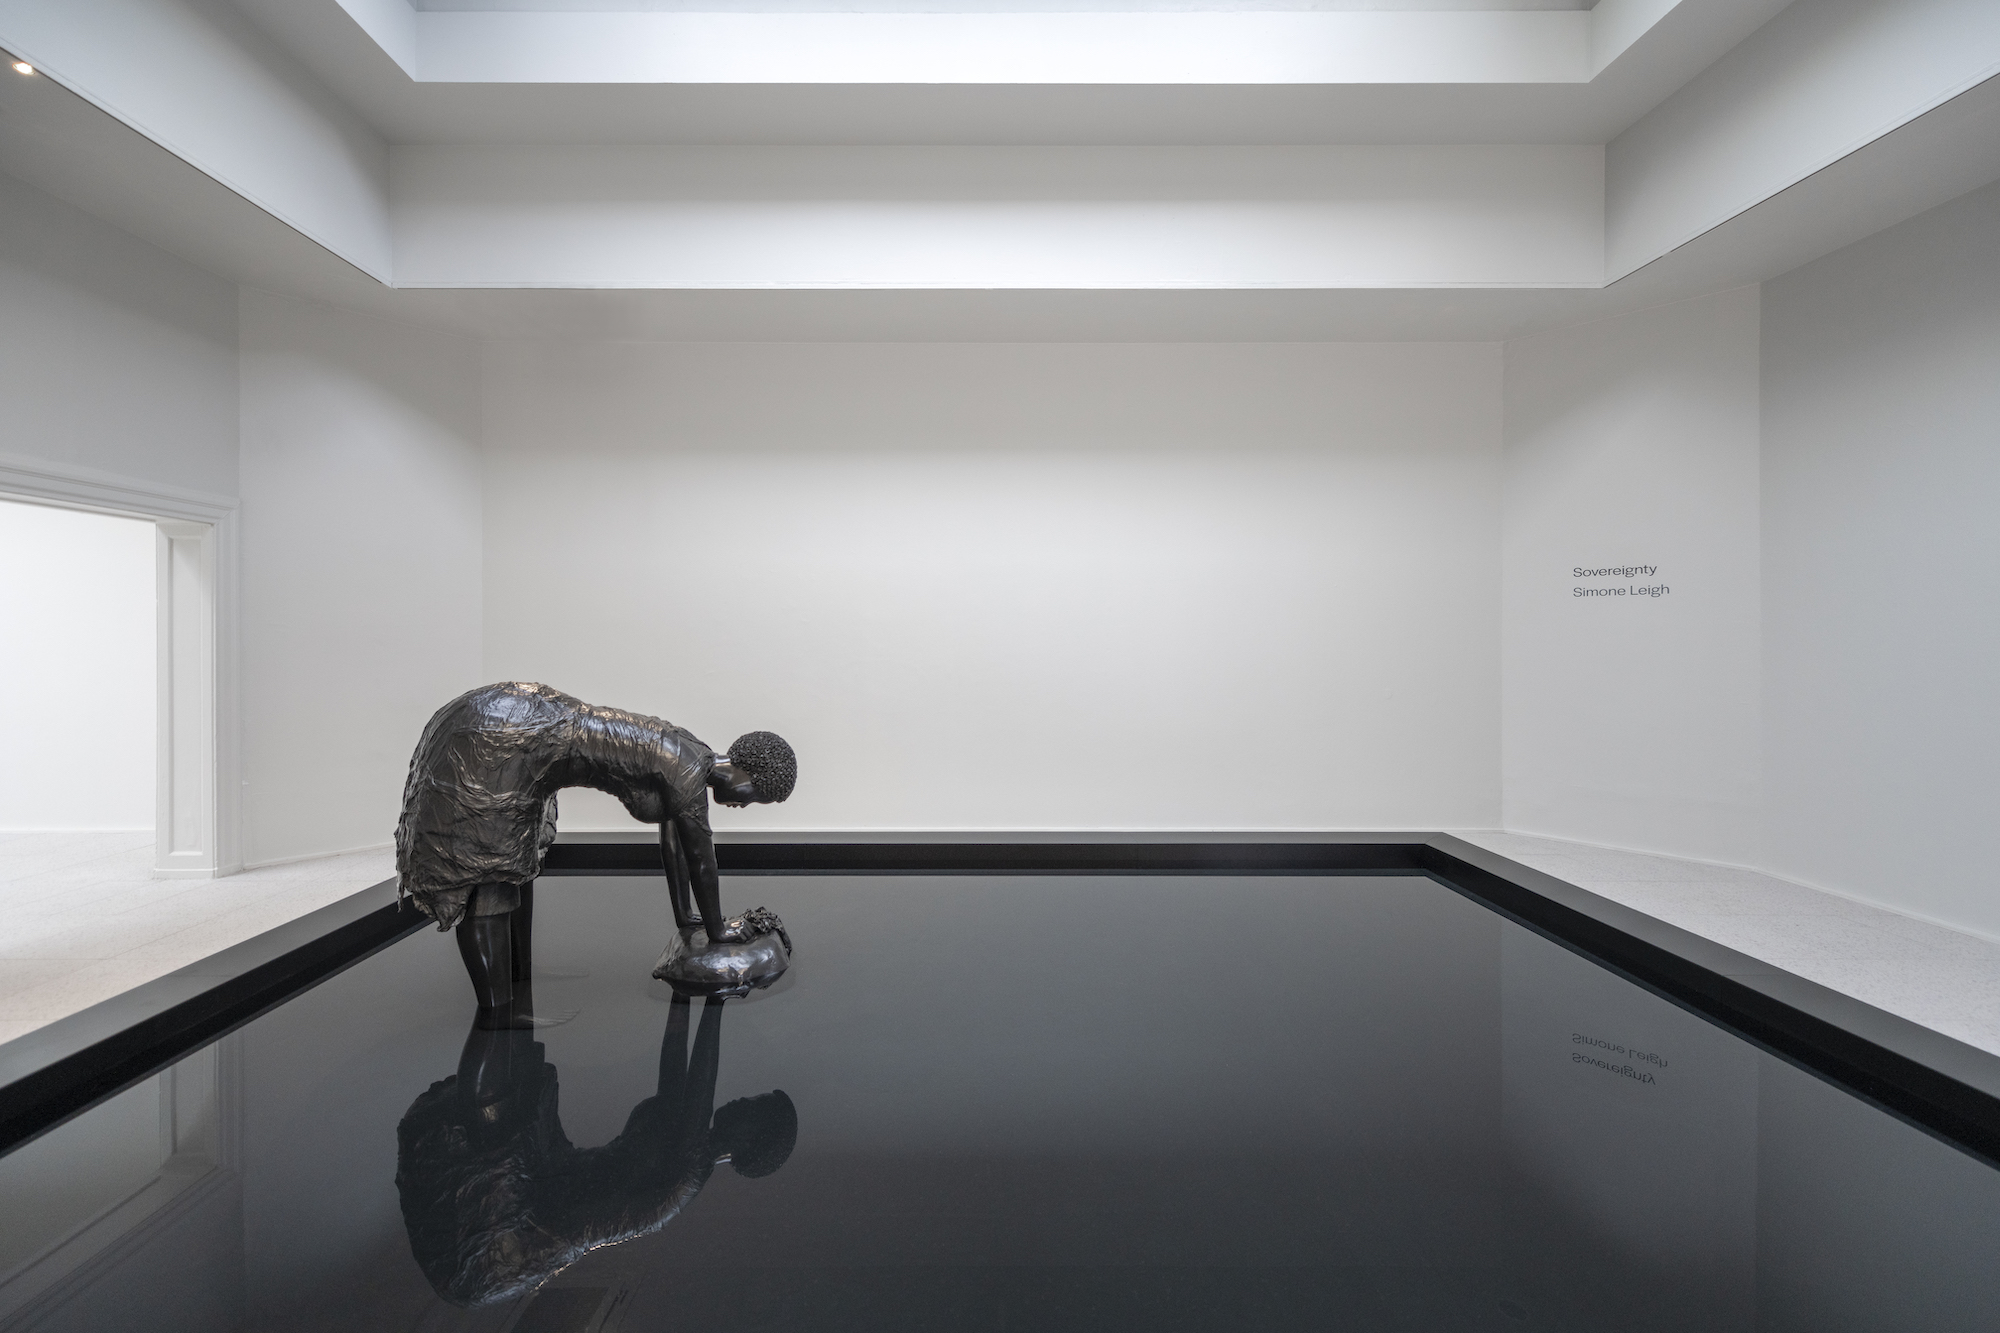 A dark bronze sculpture of a woman bent over a pool of water, her image being reflected.